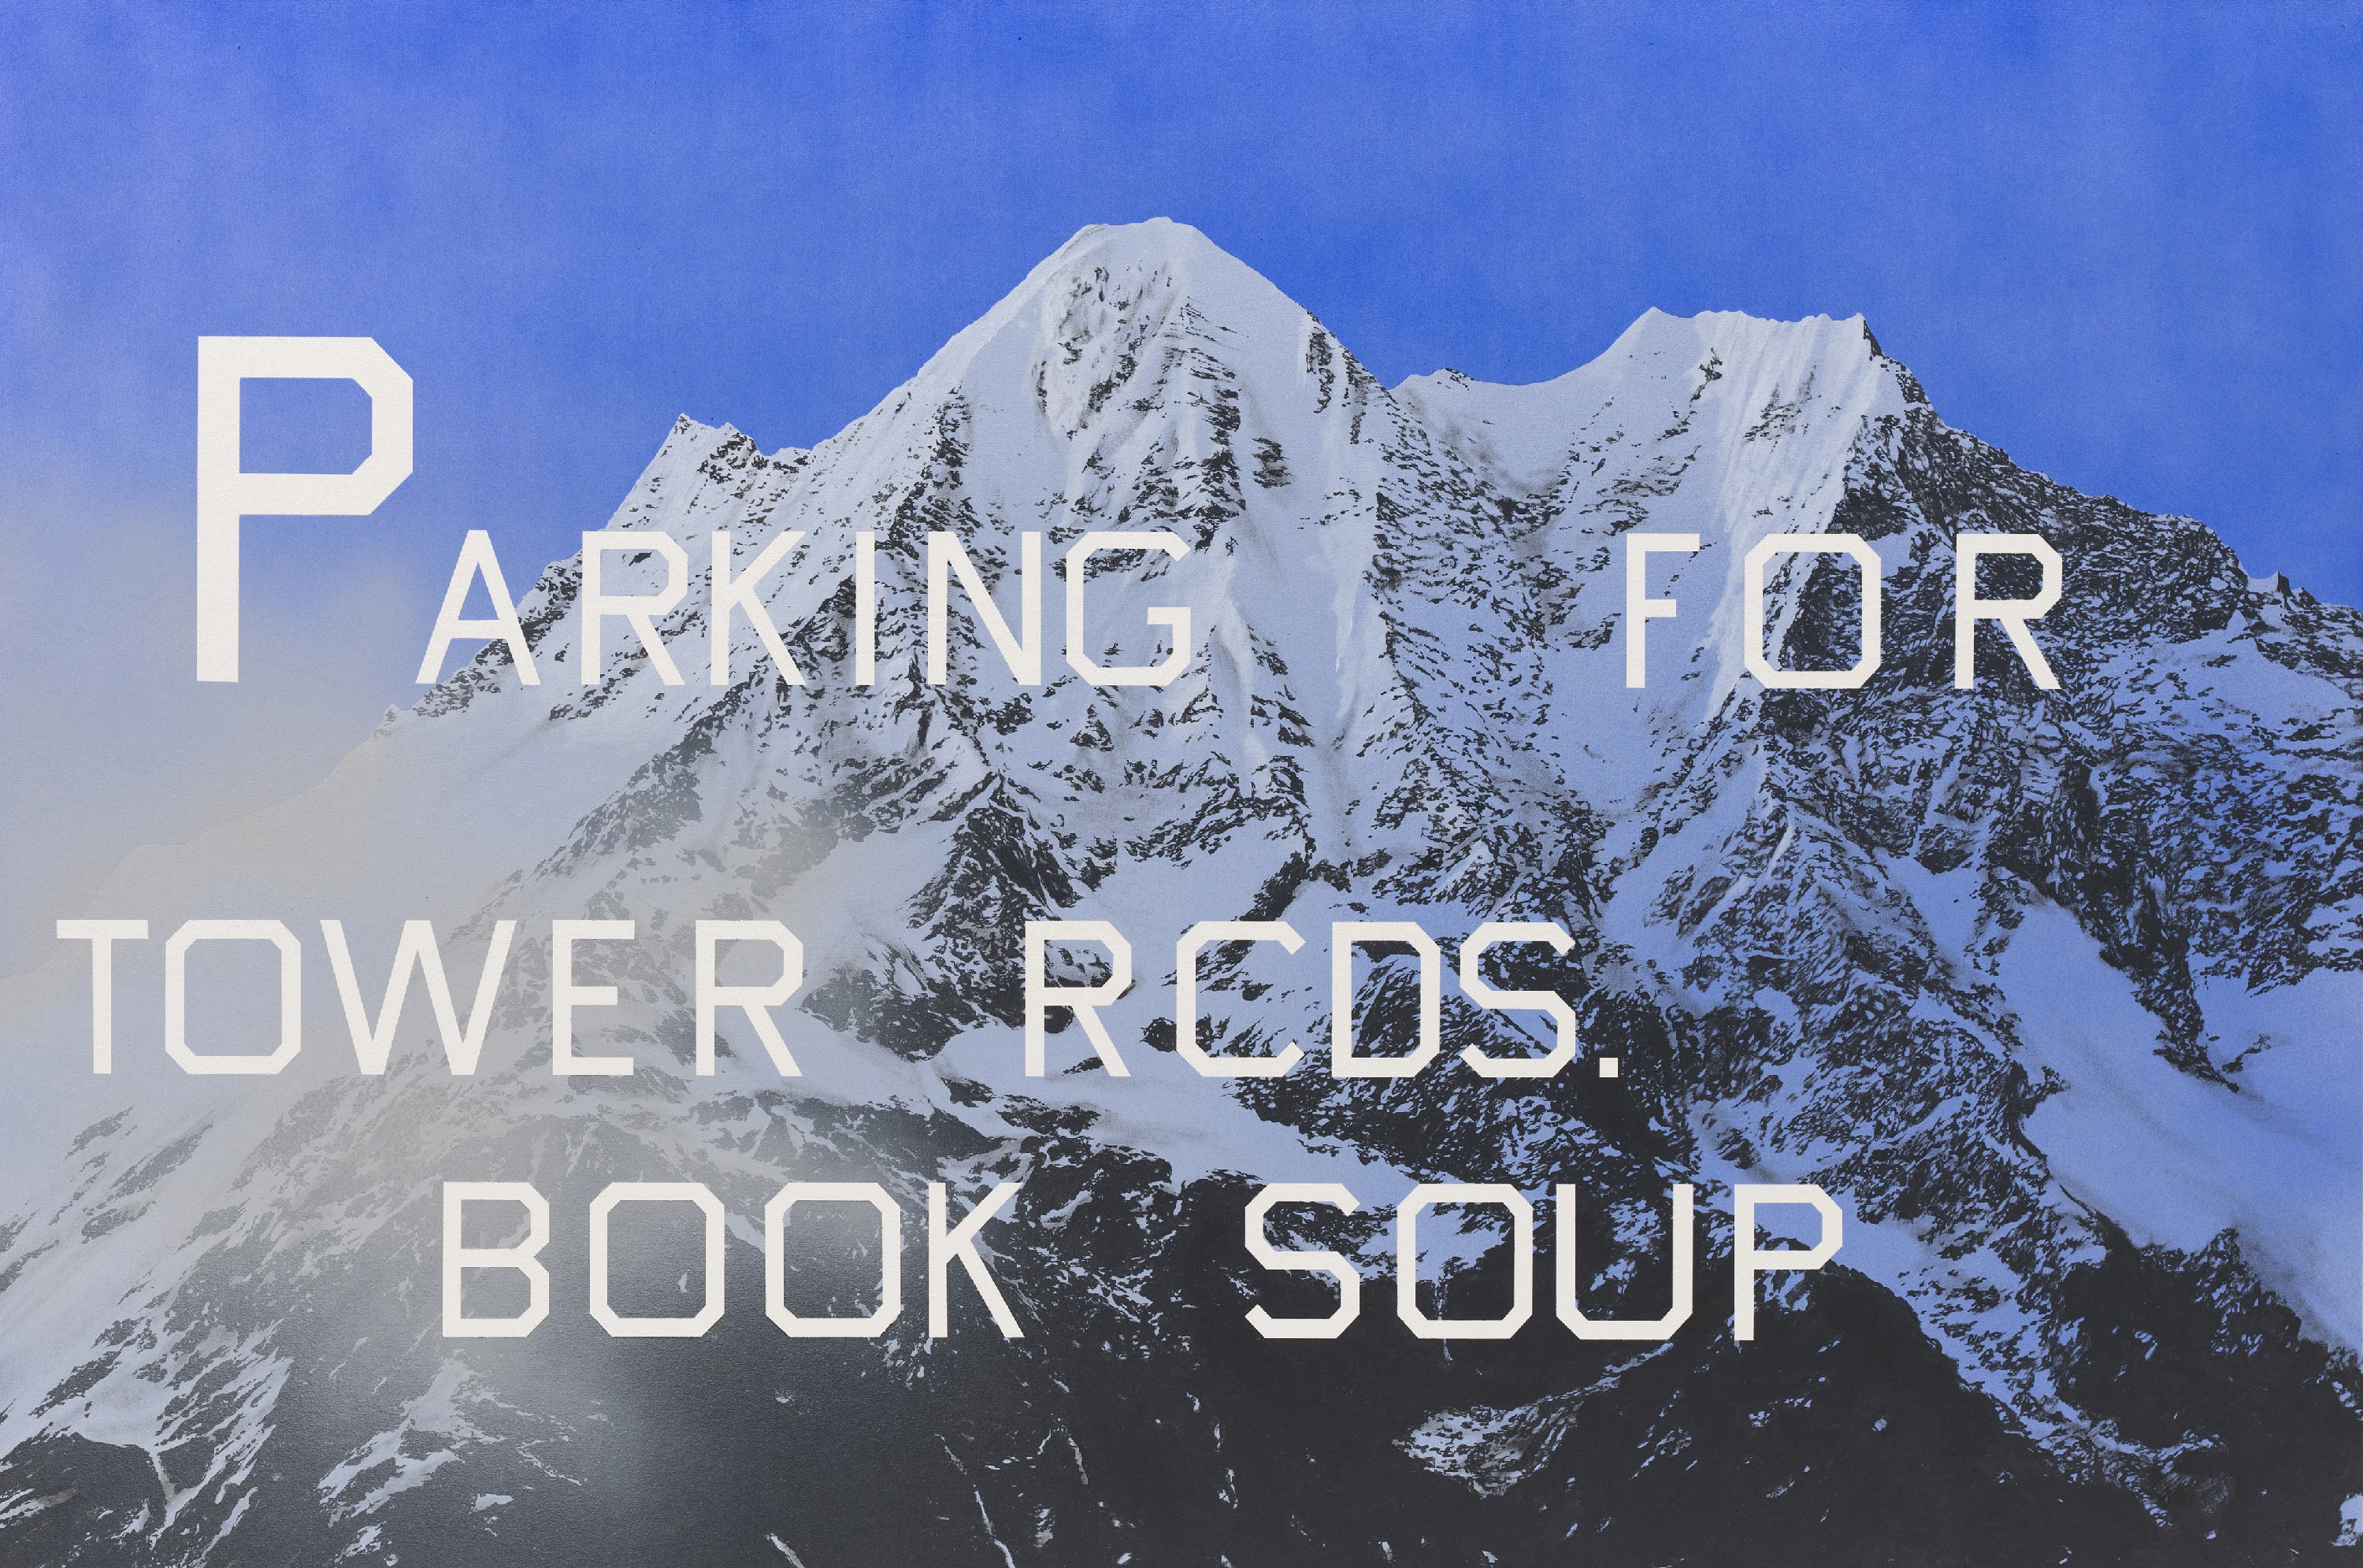 Parking for Tower Rcds. Book Soup, Edward Ruscha